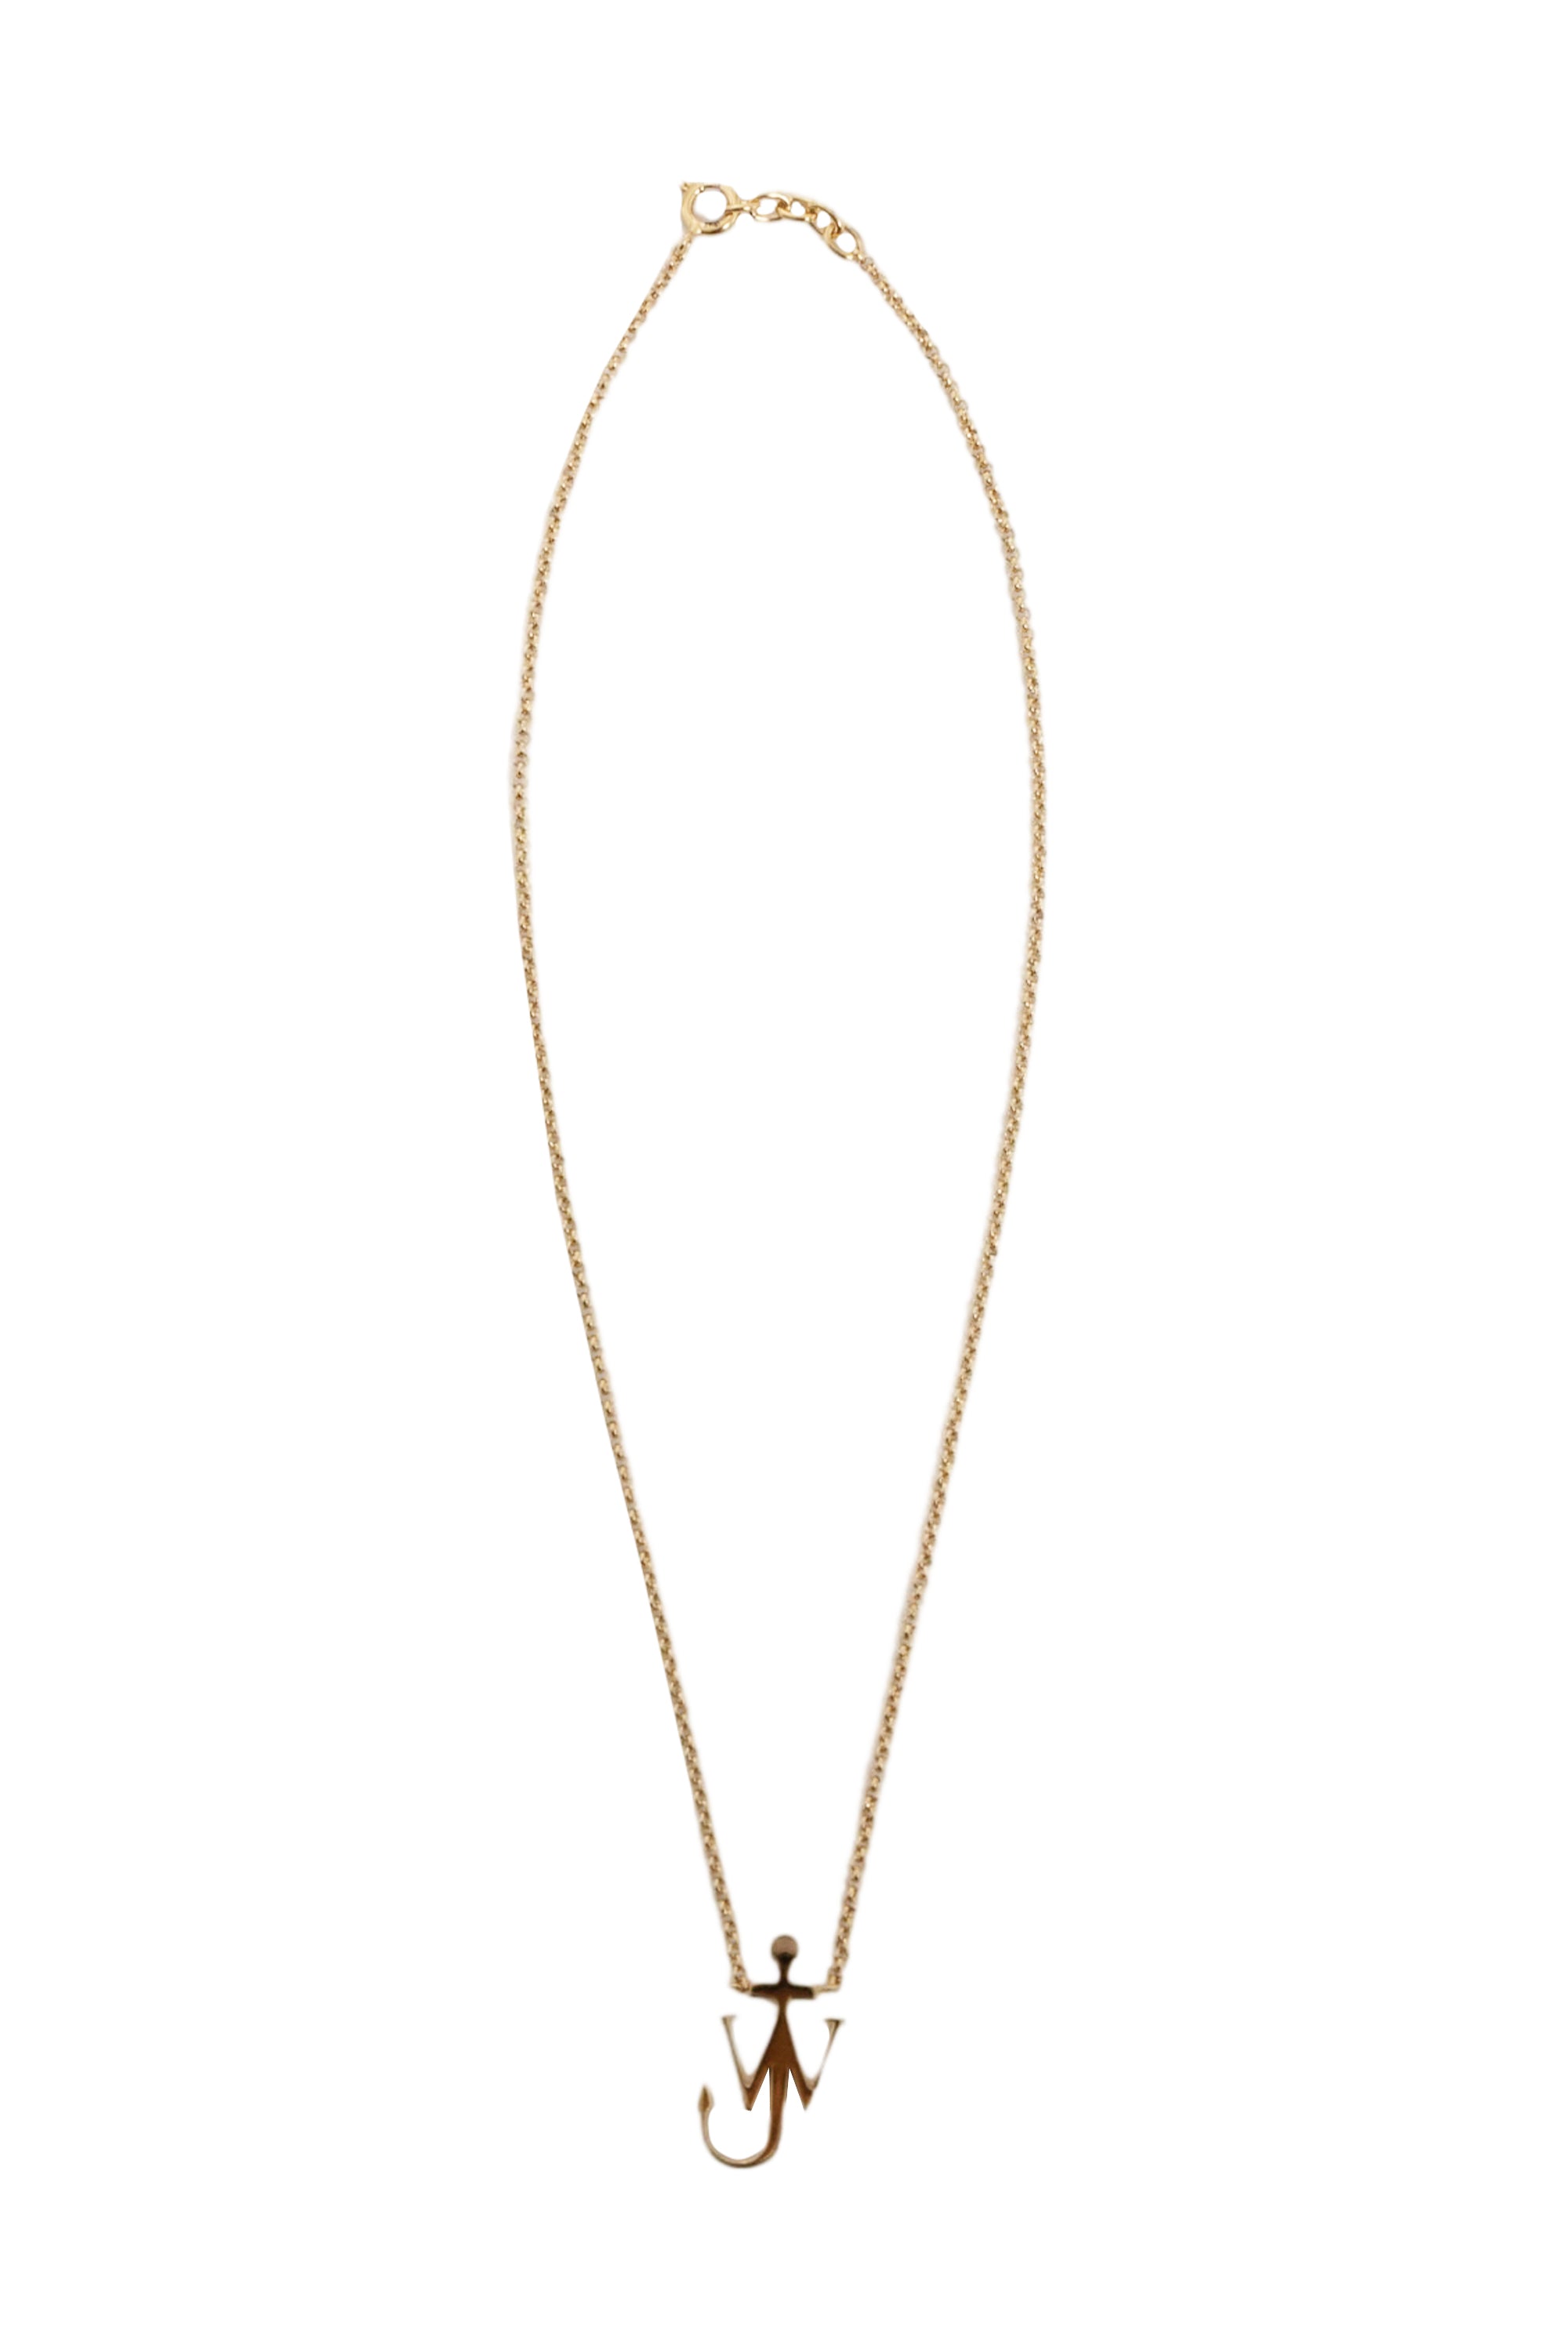 JW Anderson FW23 ANCHOR PENDANT NECKLACE / GOLD - NUBIAN